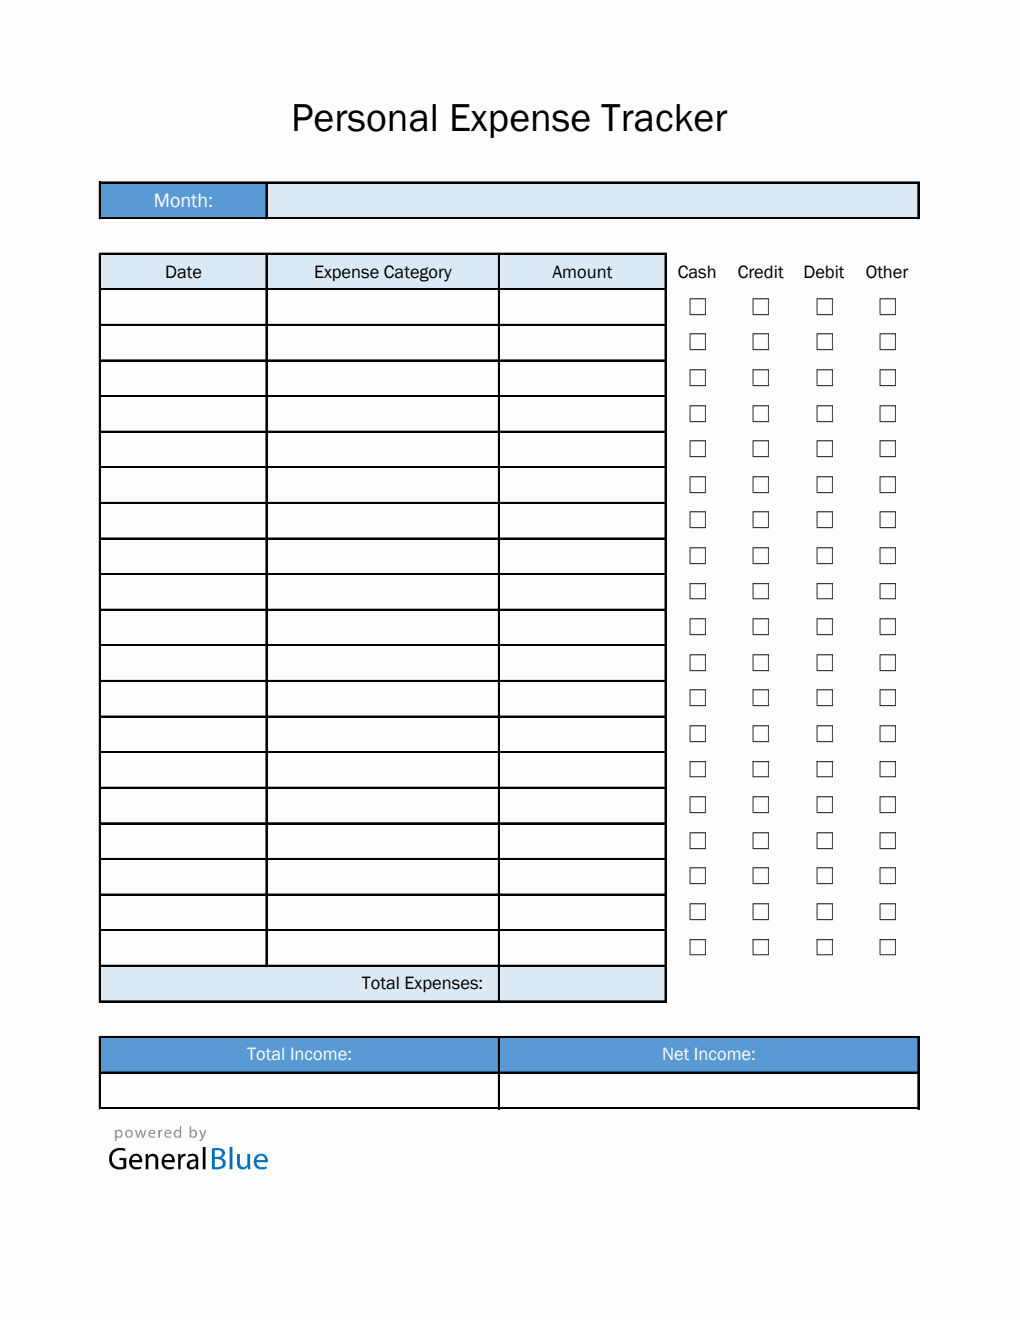 Personal Expense Tracker in Excel (Blue)